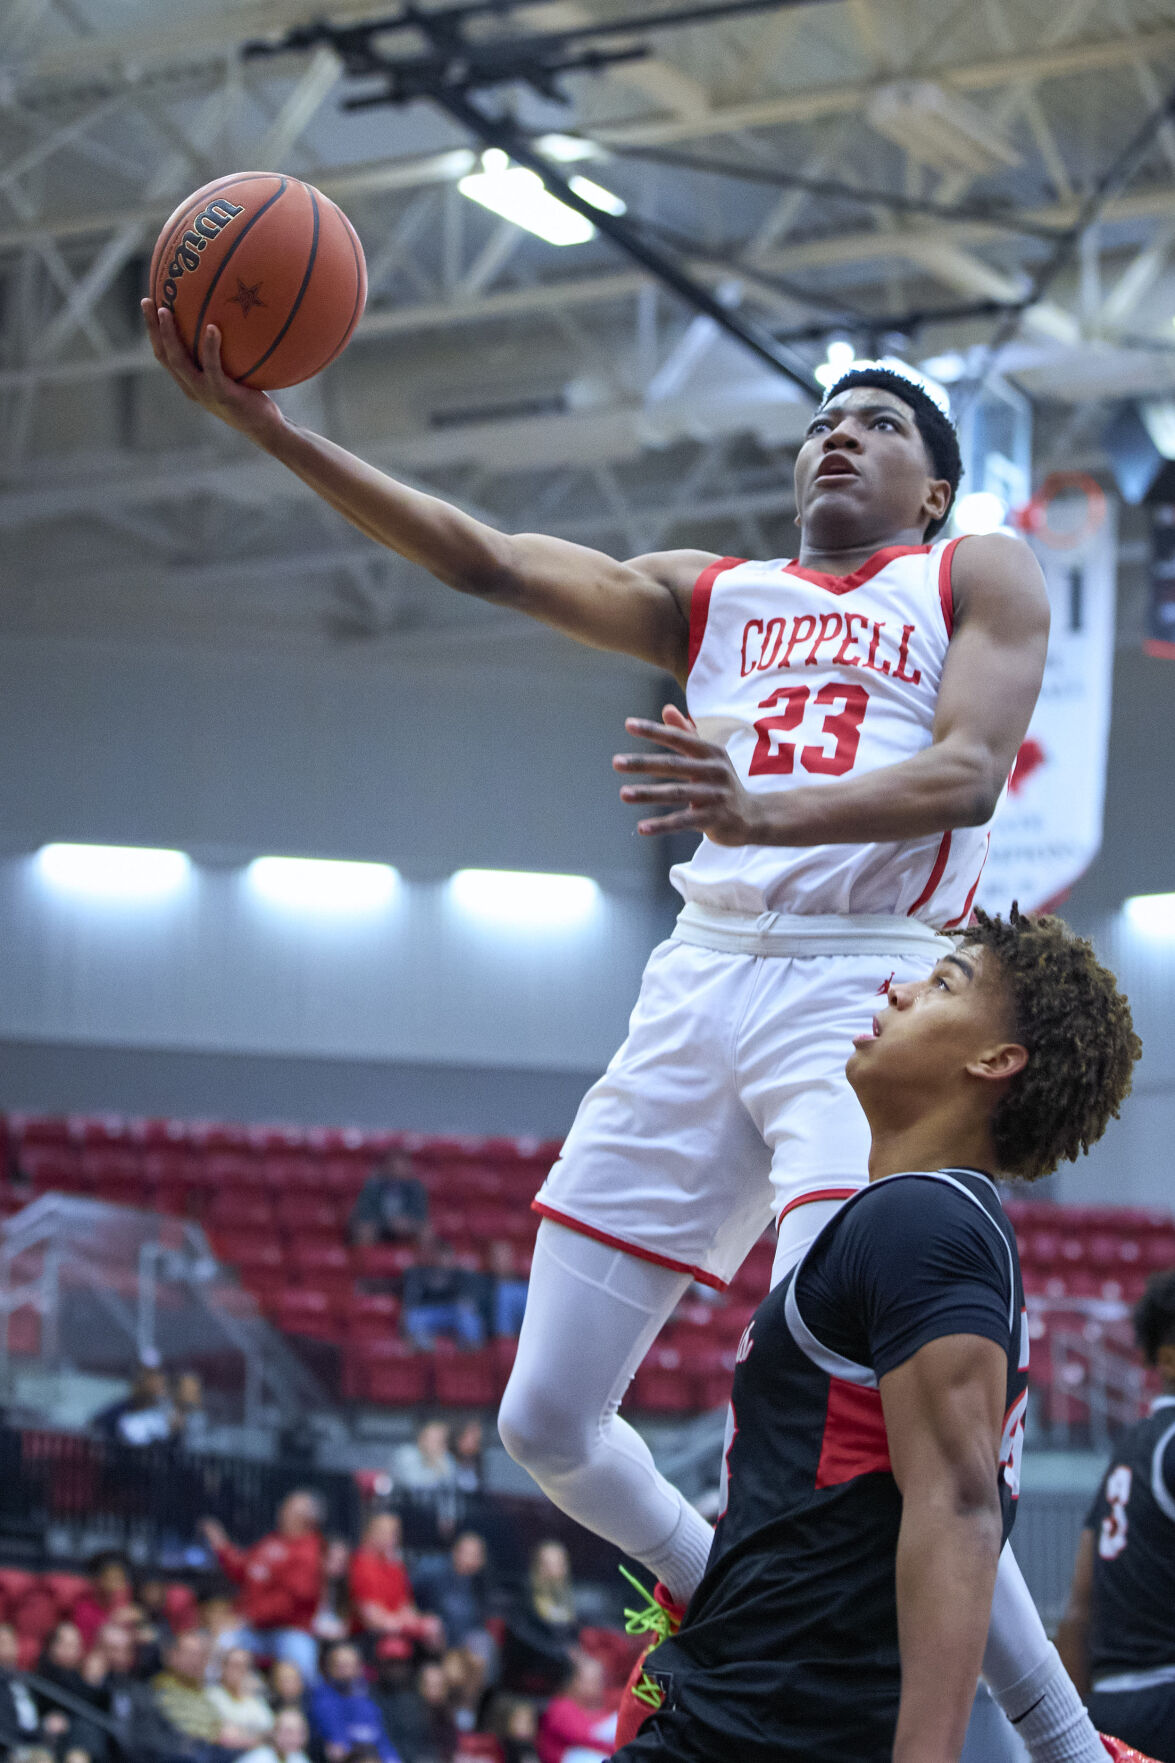 High School Basketball Roundup: Coppell and Lewisville Win Thrilling Games, Marcus Extends Lead, and Prince of Peace Dominates